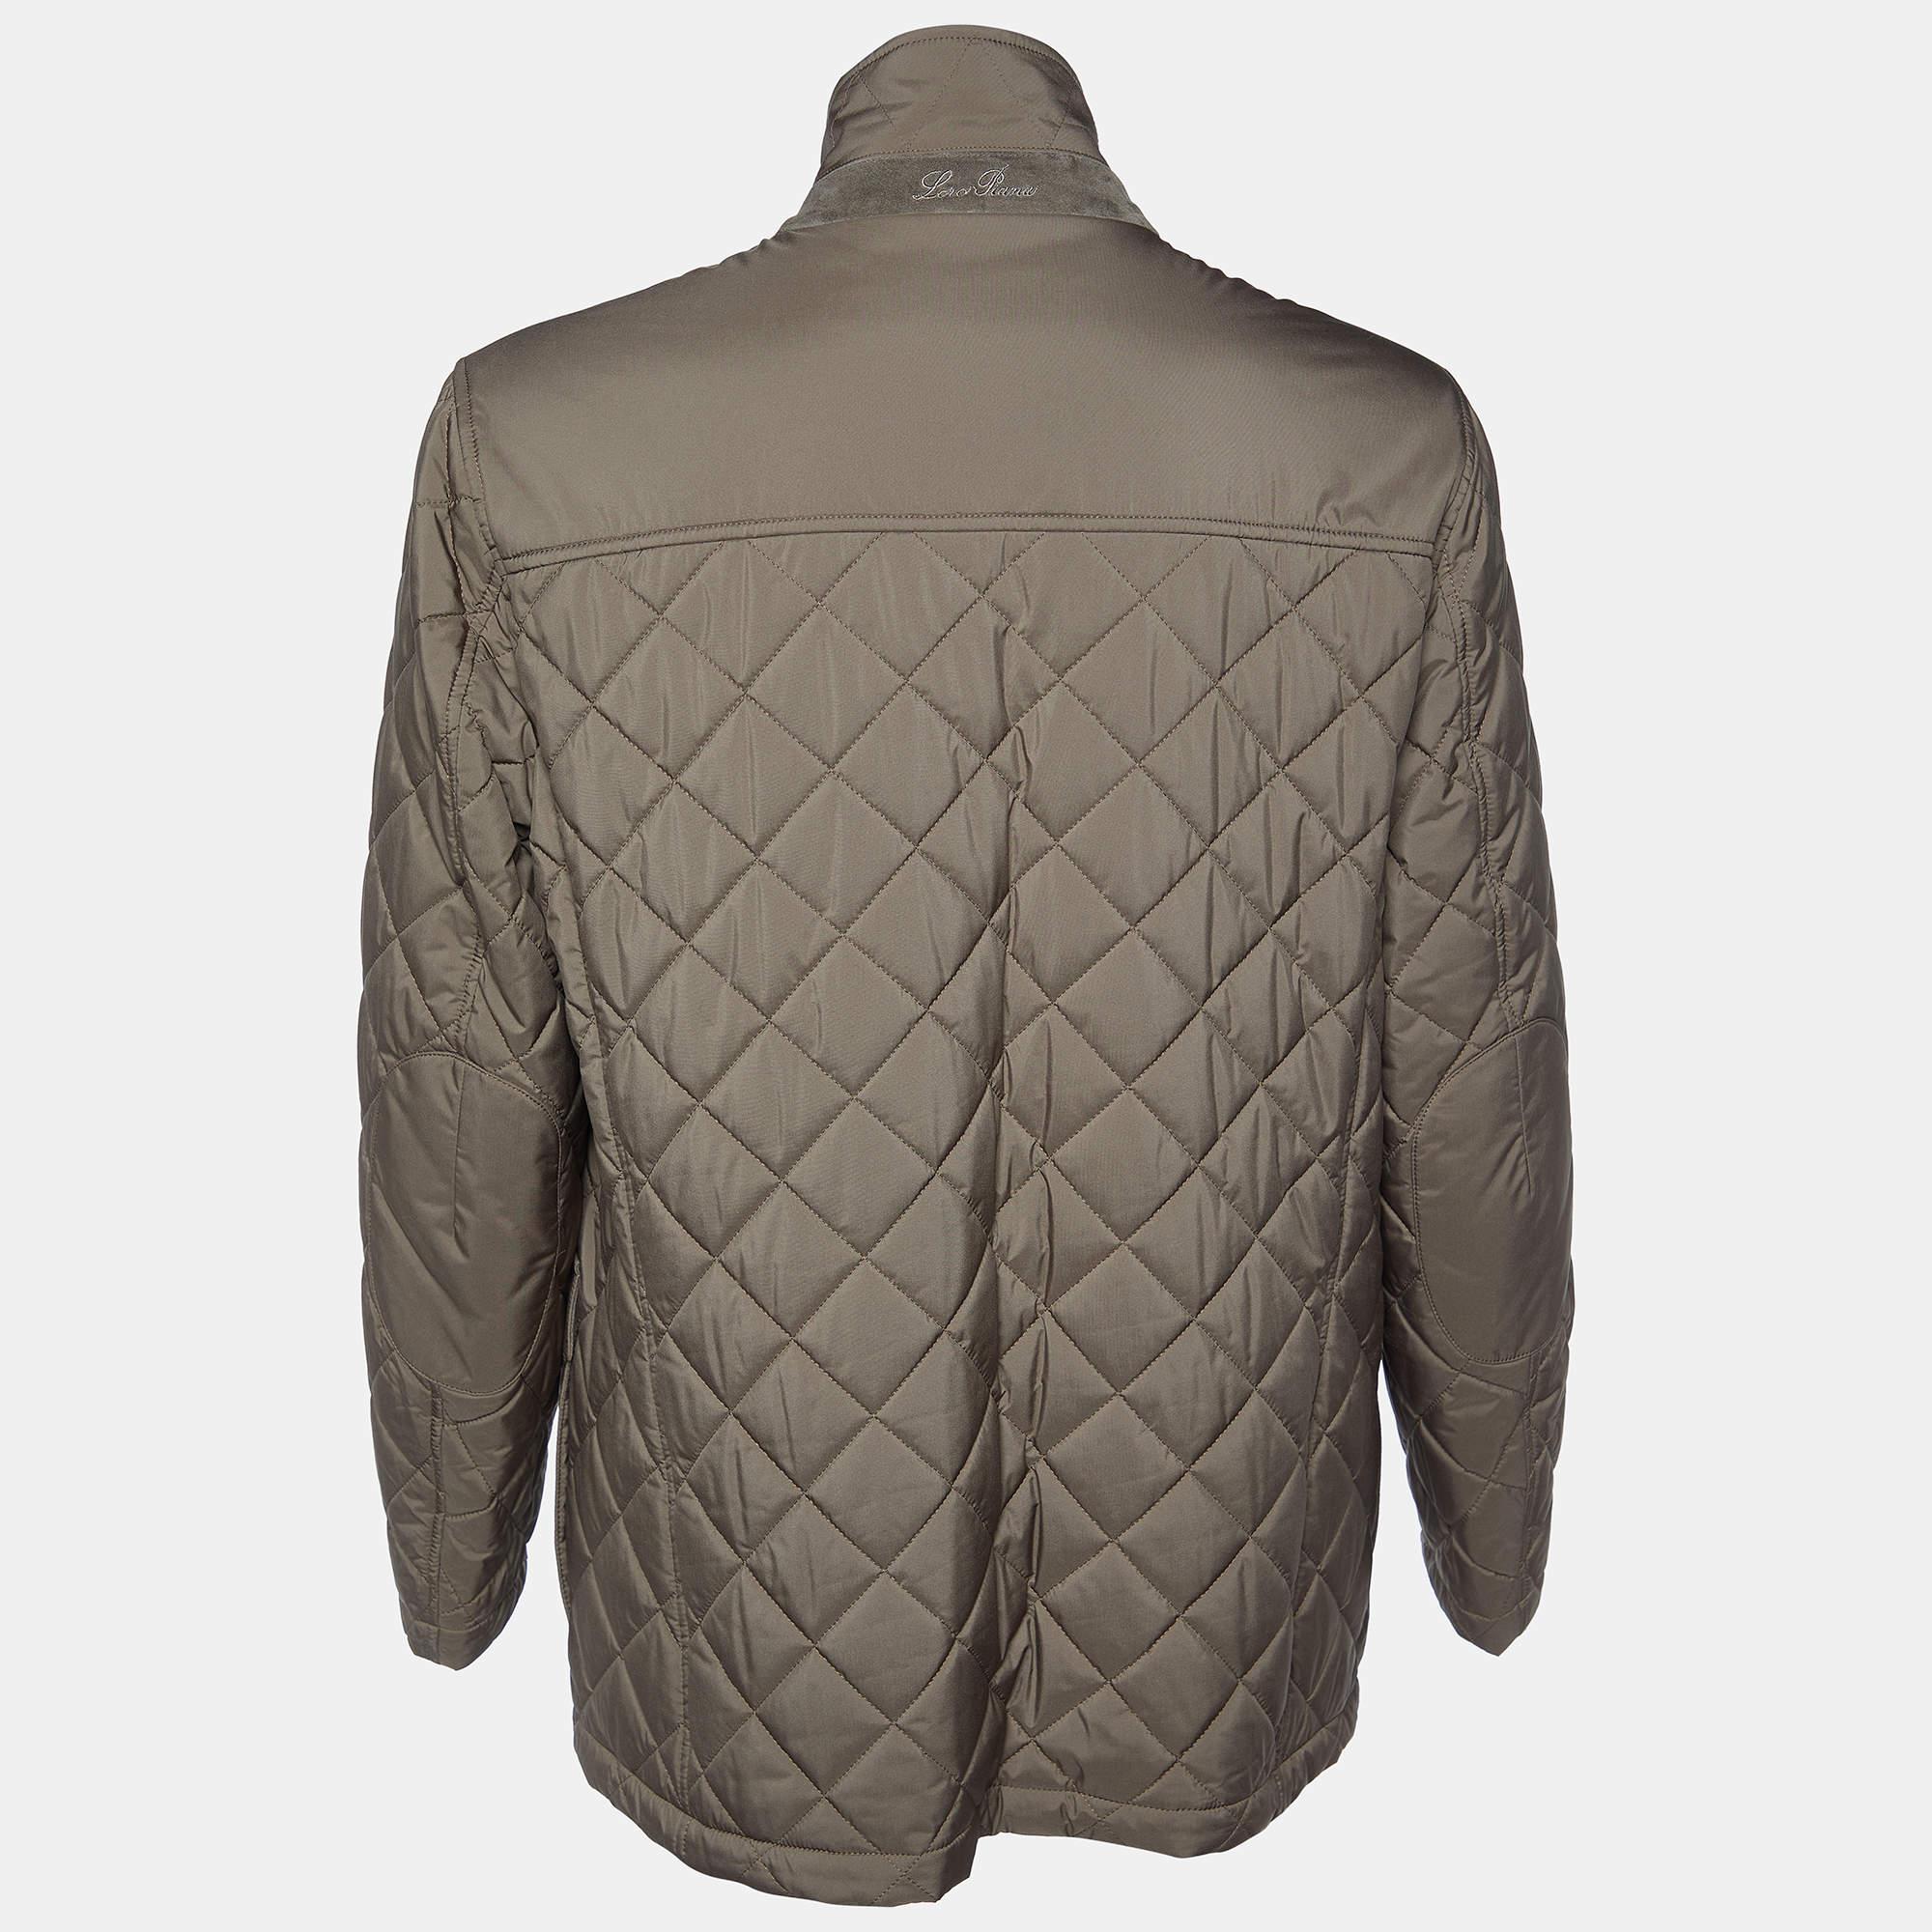 How fabulous does this designer jacket look! It is made of fine materials and features long sleeves. Pair it with pants and sneakers for a cool look.

Includes: Hanger